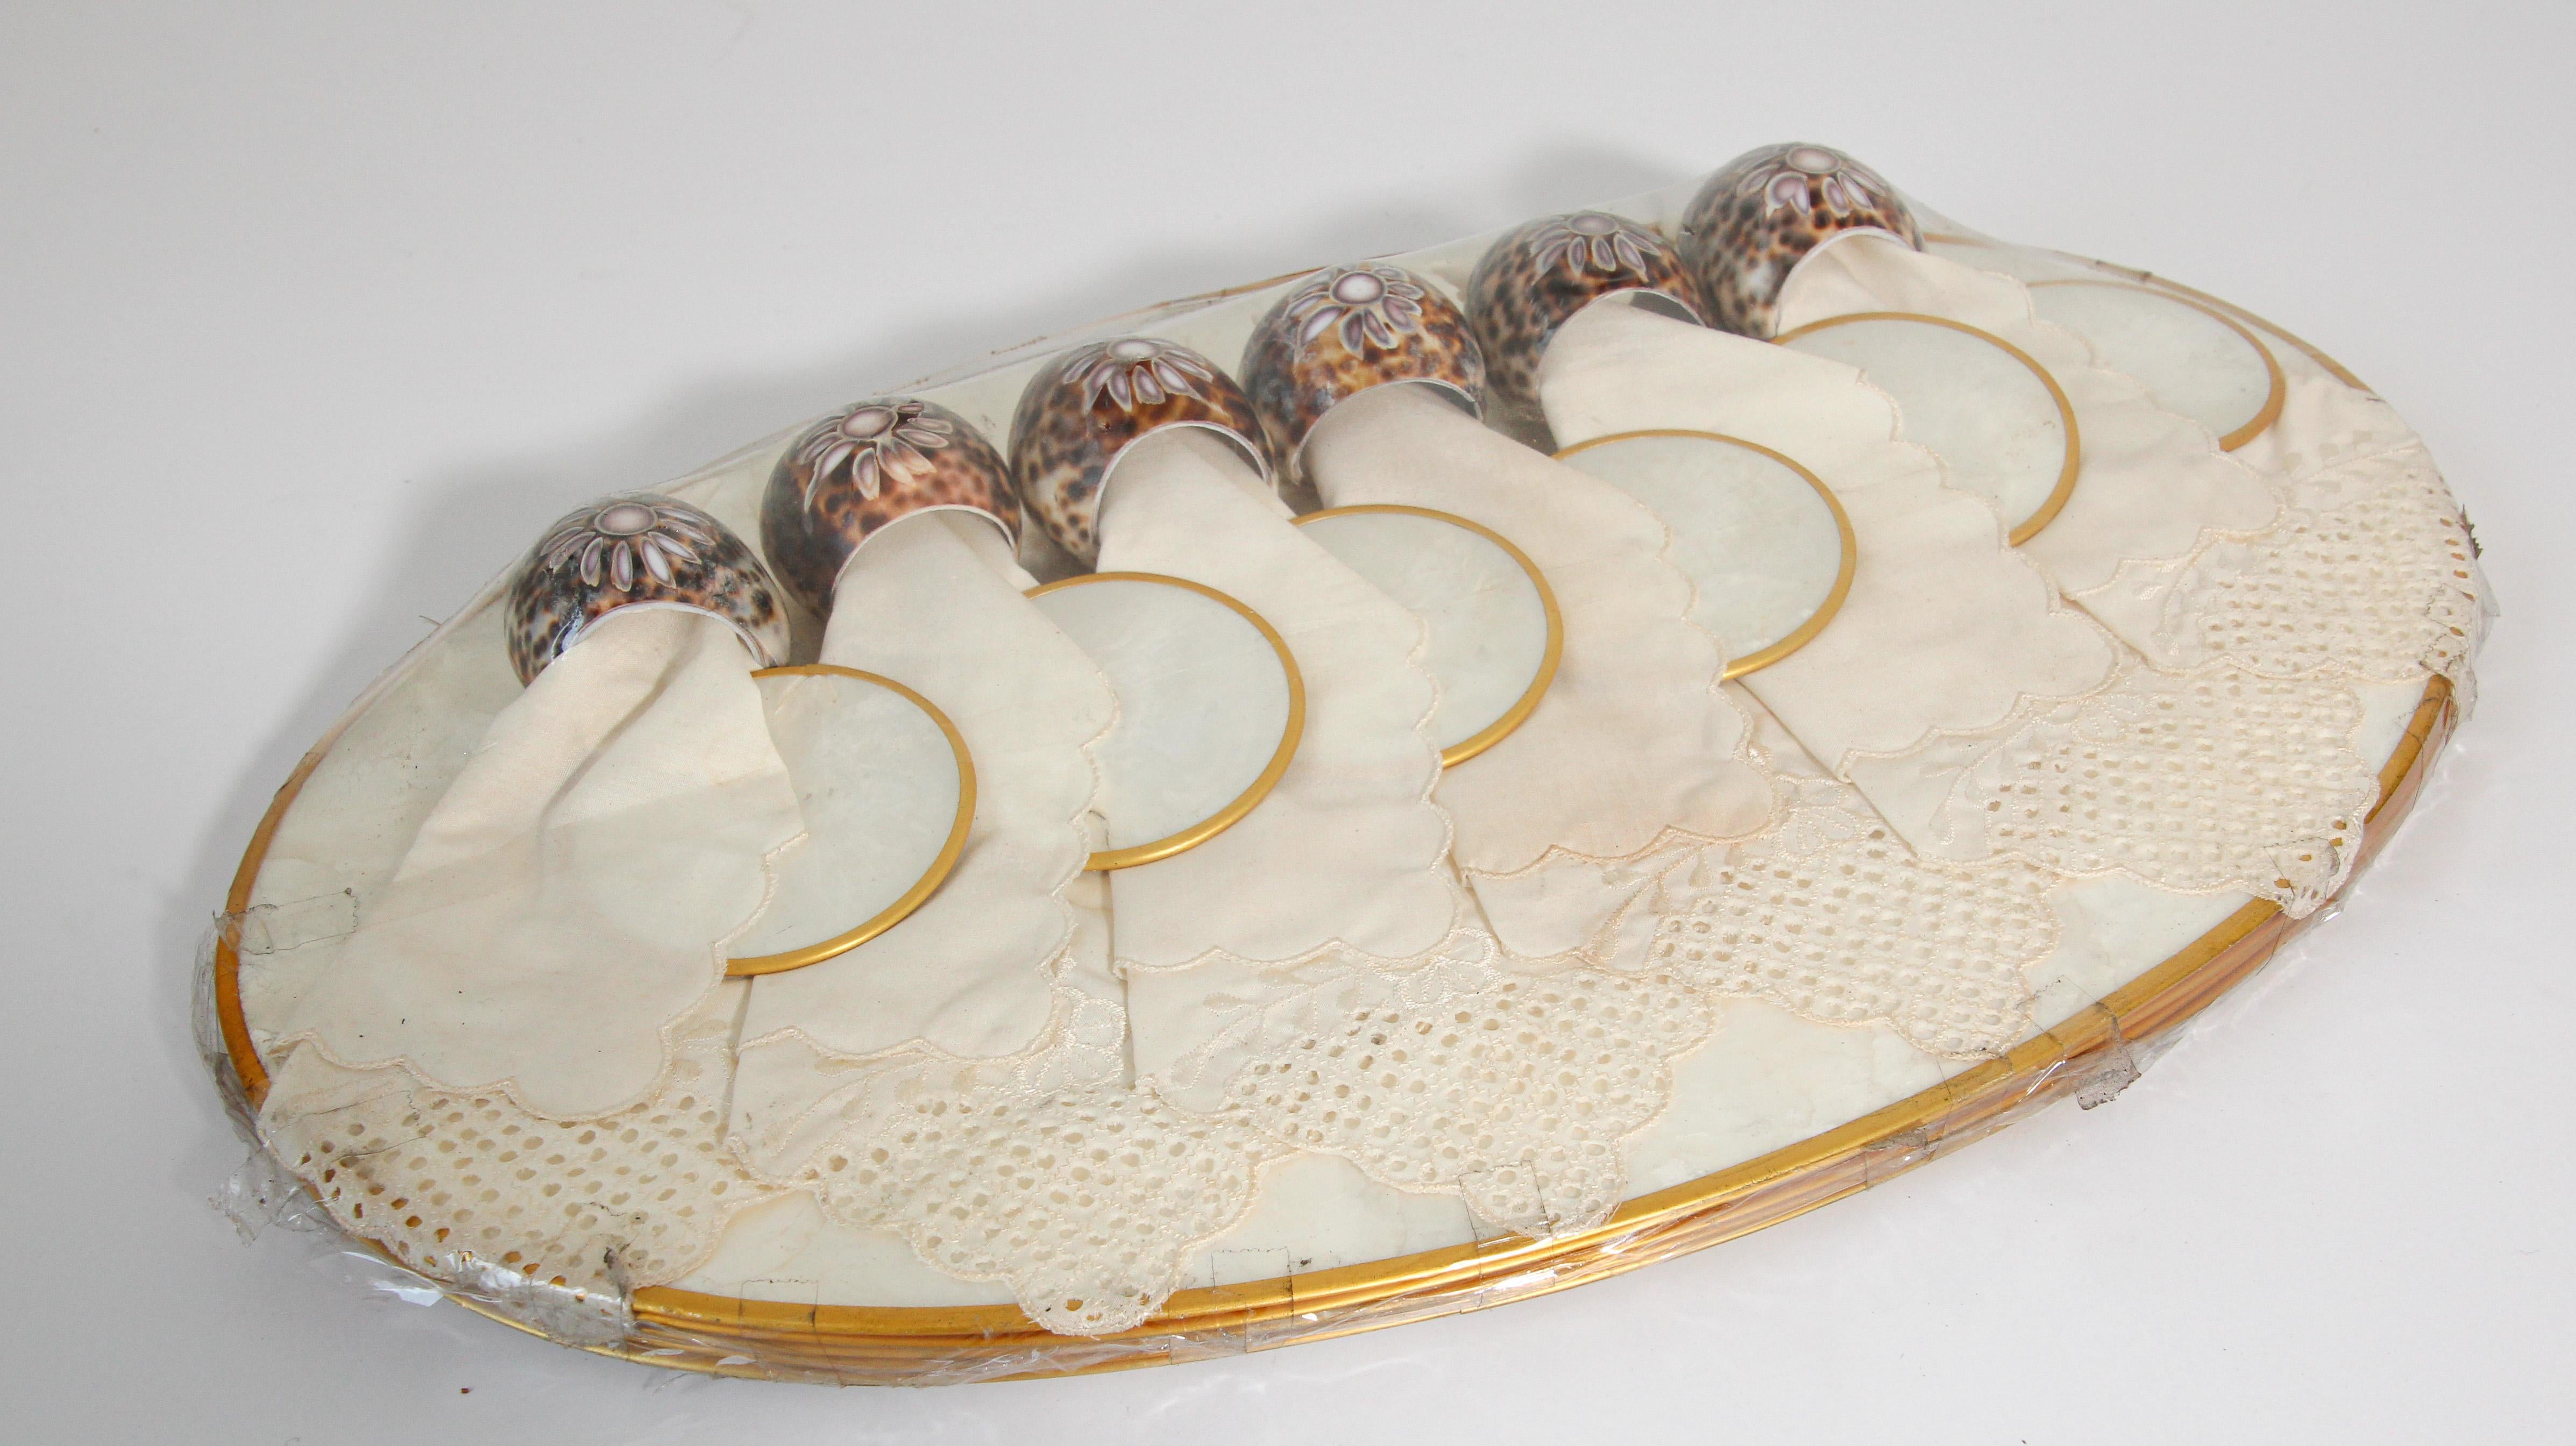 Vintage Hallie St Mary placemats, set of six capiz, pearl shell design oval placemats set with brass rim.
Luminous, beautiful mother of pearl shell color.
The reverse of these placemats is cork. 
These would make a beautiful, tropical and elegant